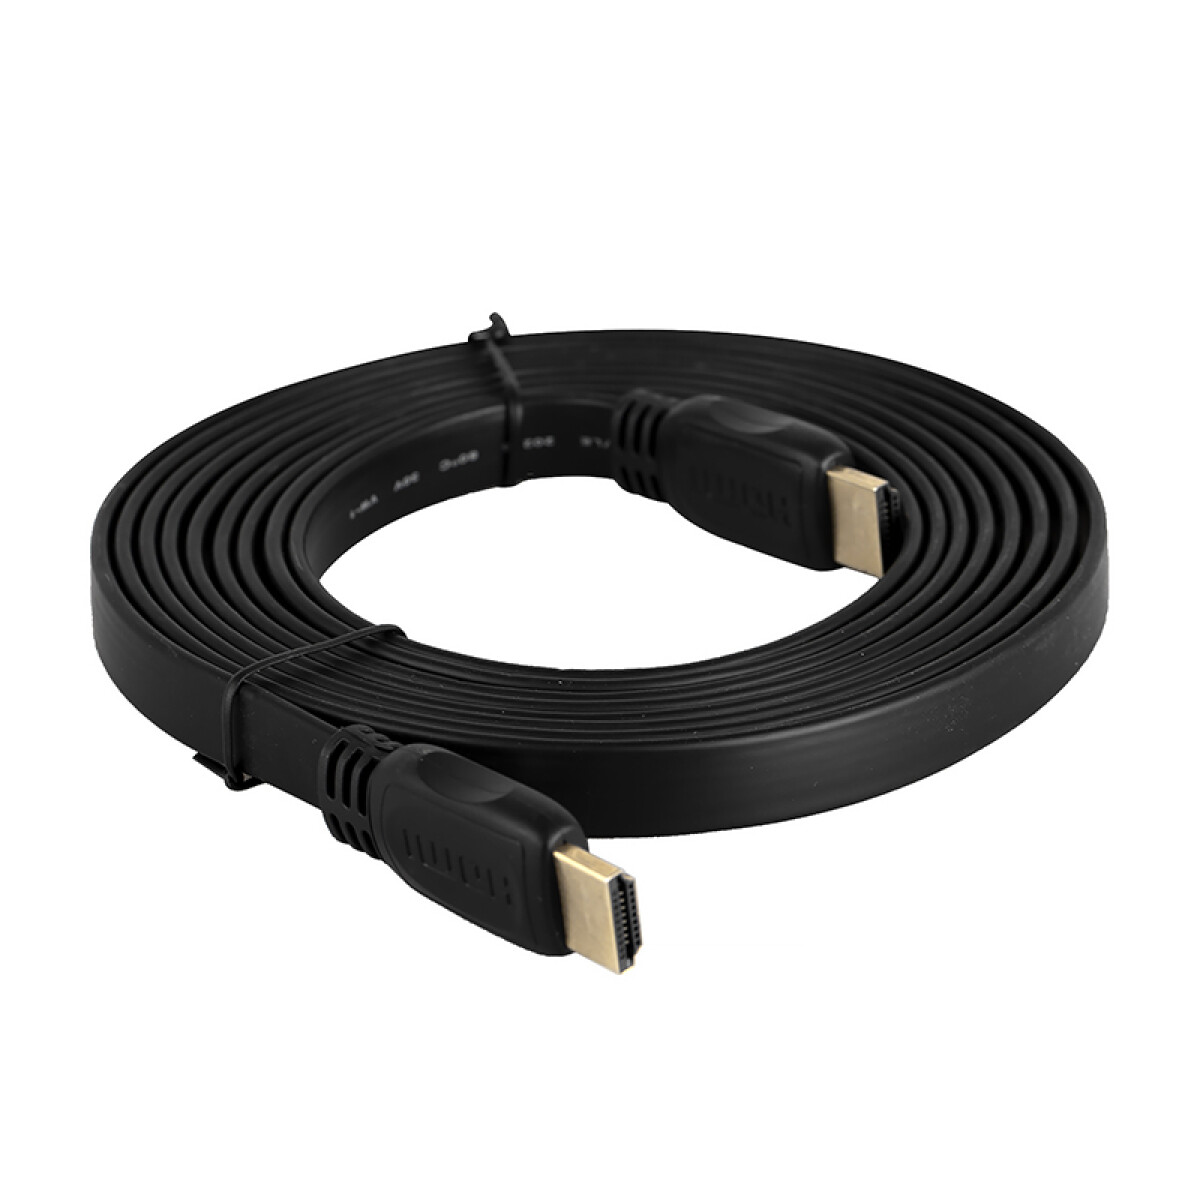 Cable HDMI HDTV 1.5 mts 